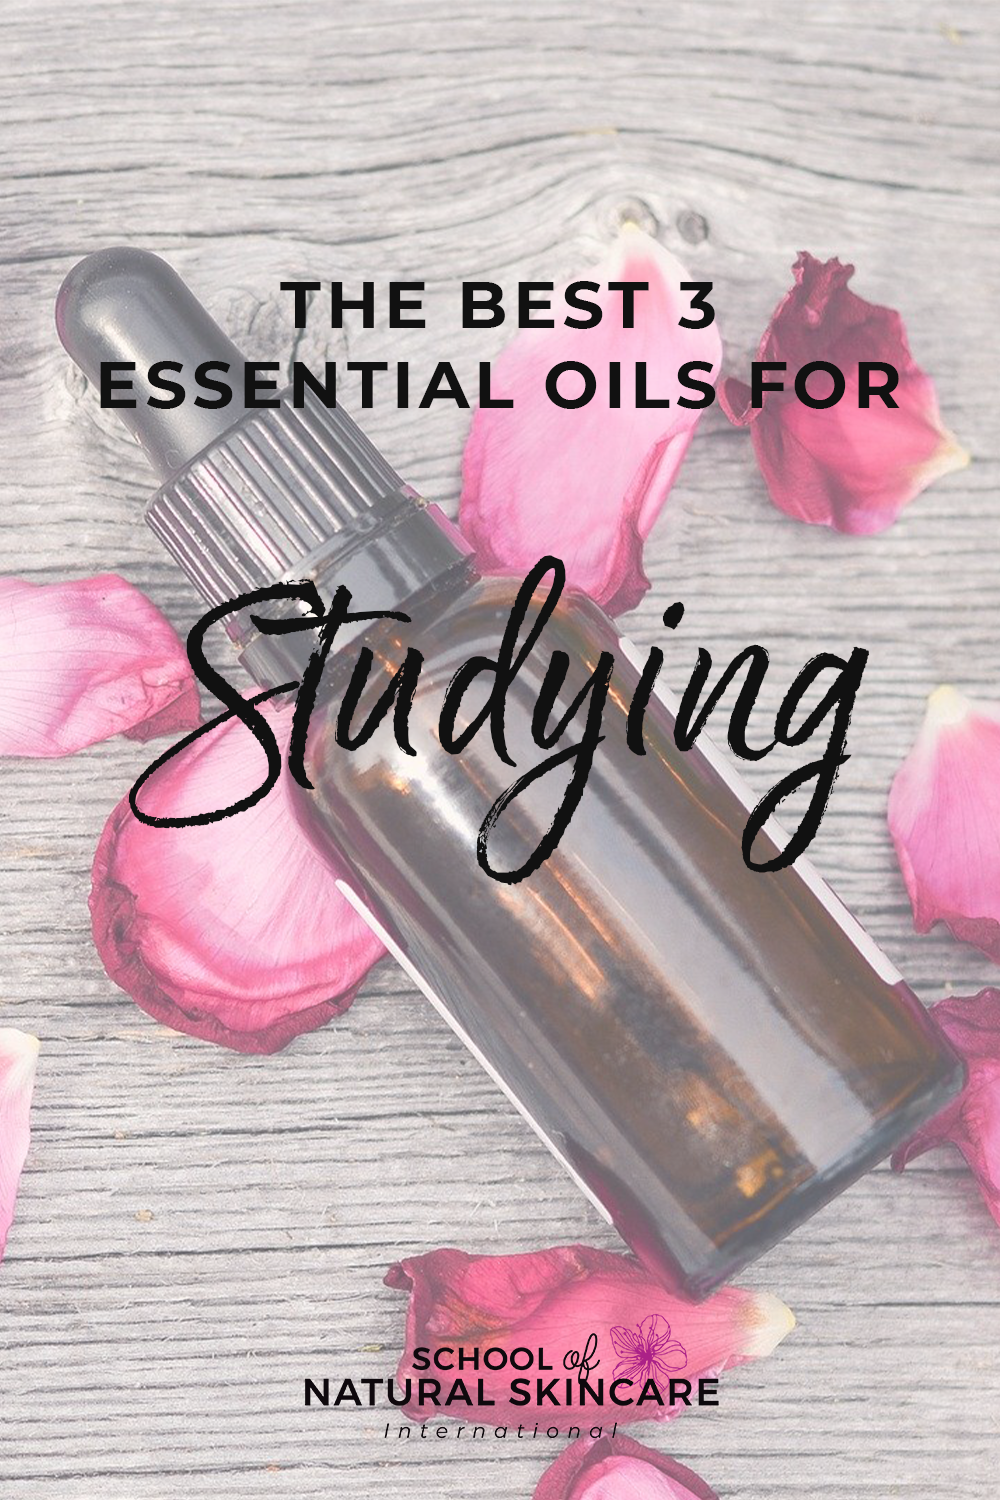 The best 3 essential oils for studying Essential oils 